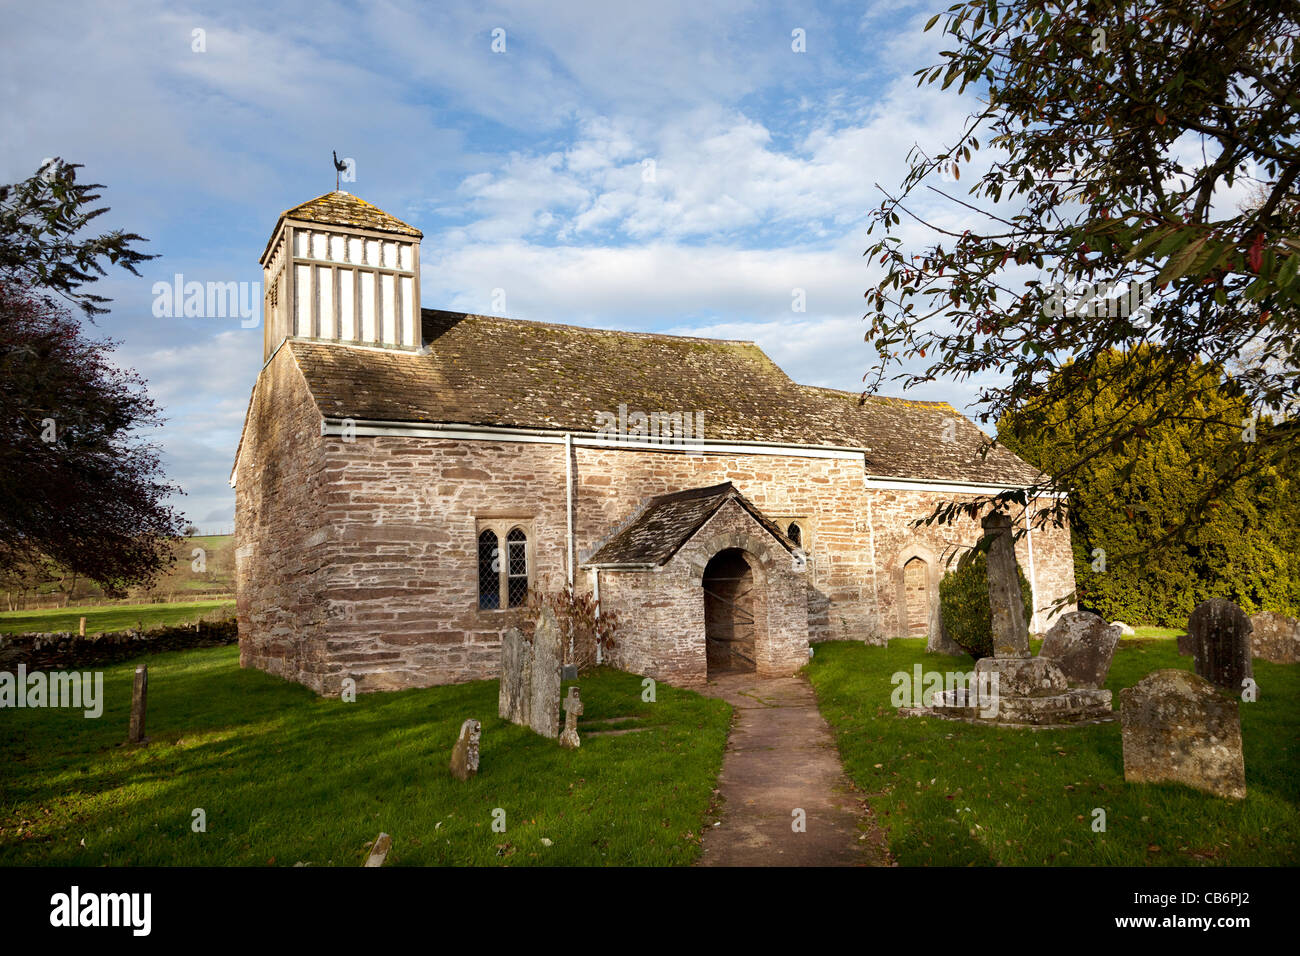 St James 14th century church with wooden tower Llangua Hereford UK Stock Photo